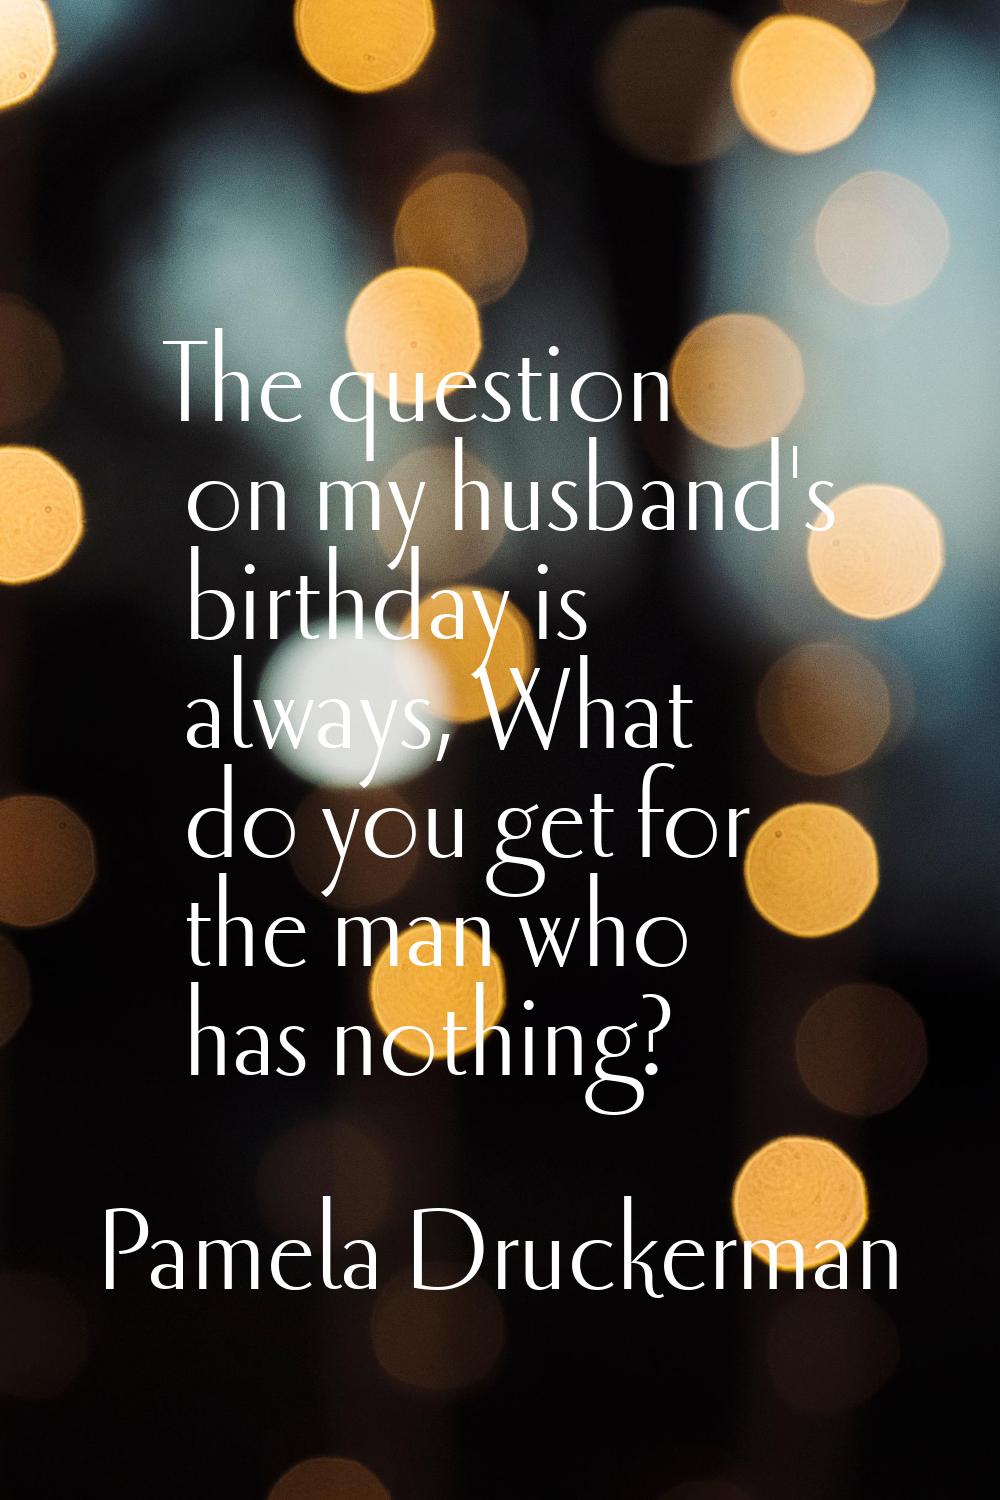 The question on my husband's birthday is always, What do you get for the man who has nothing?